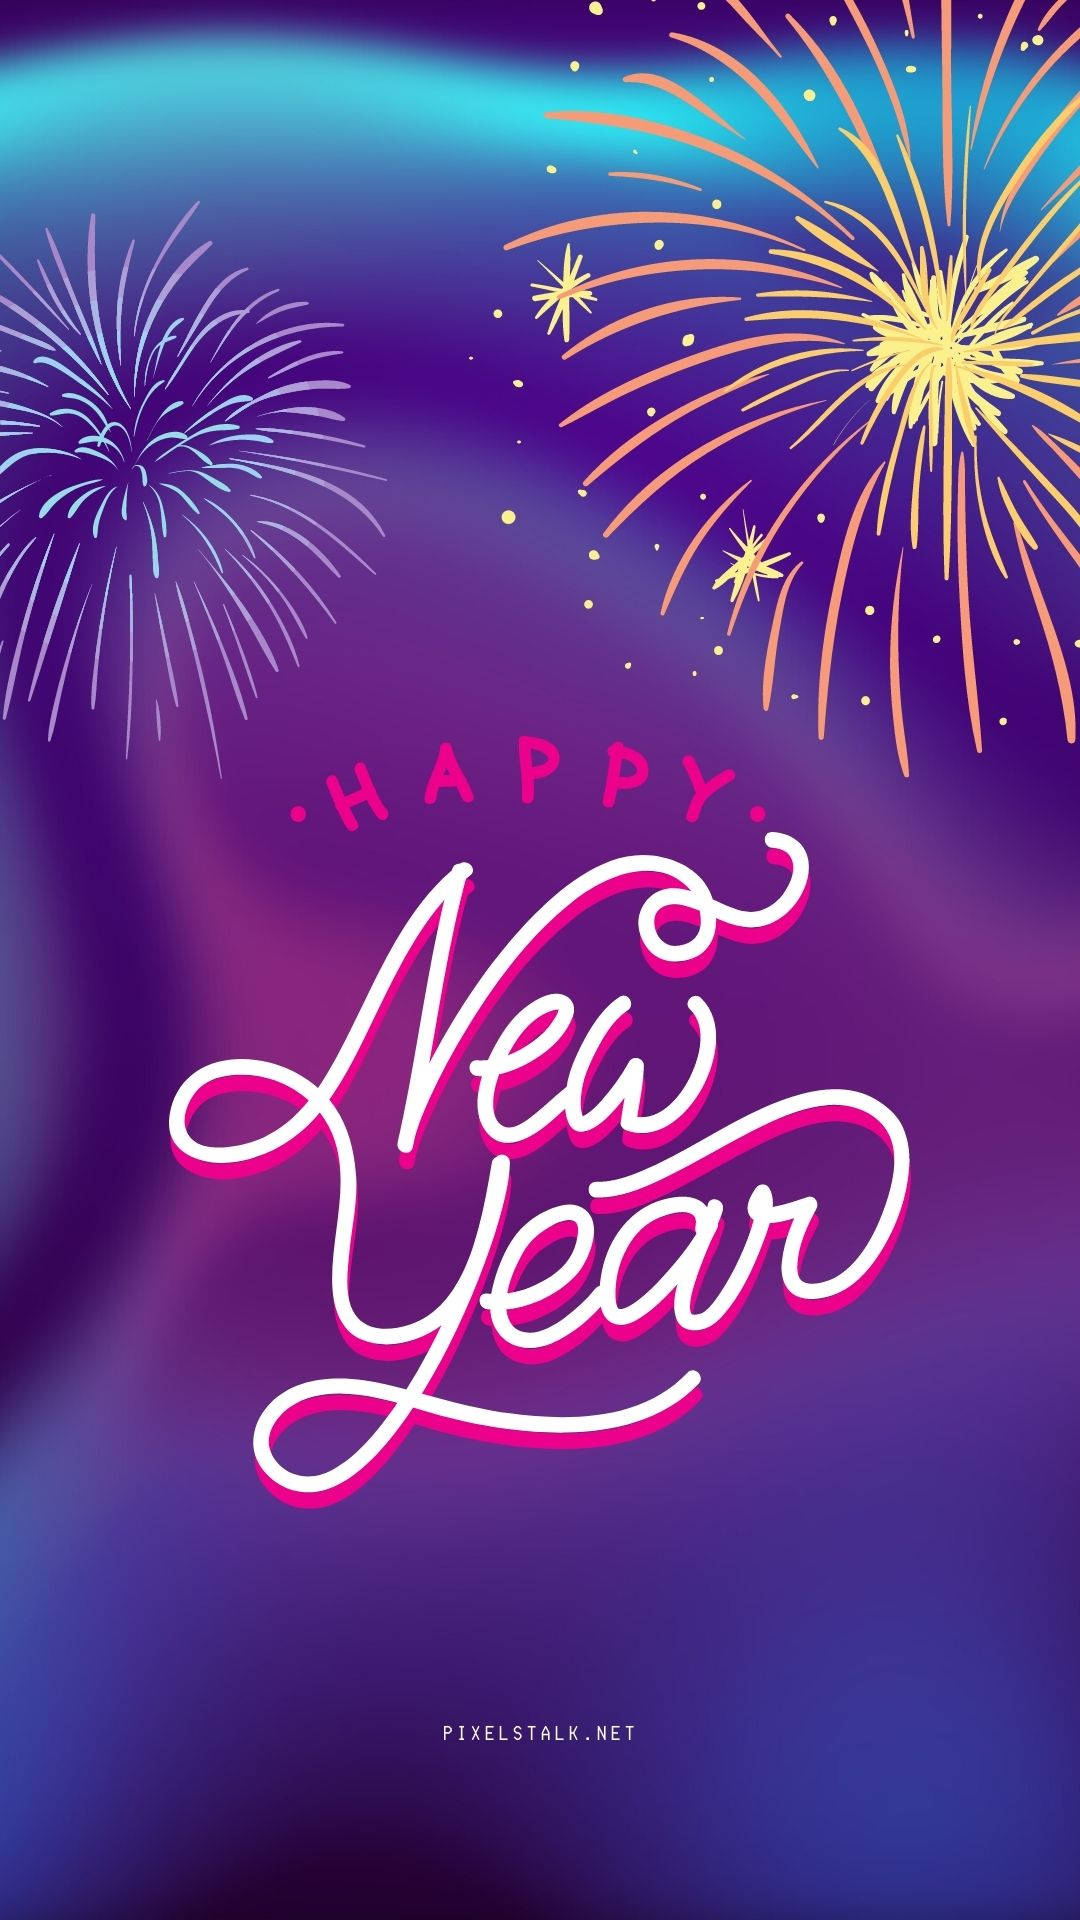 New Year Greetings On Purple Background